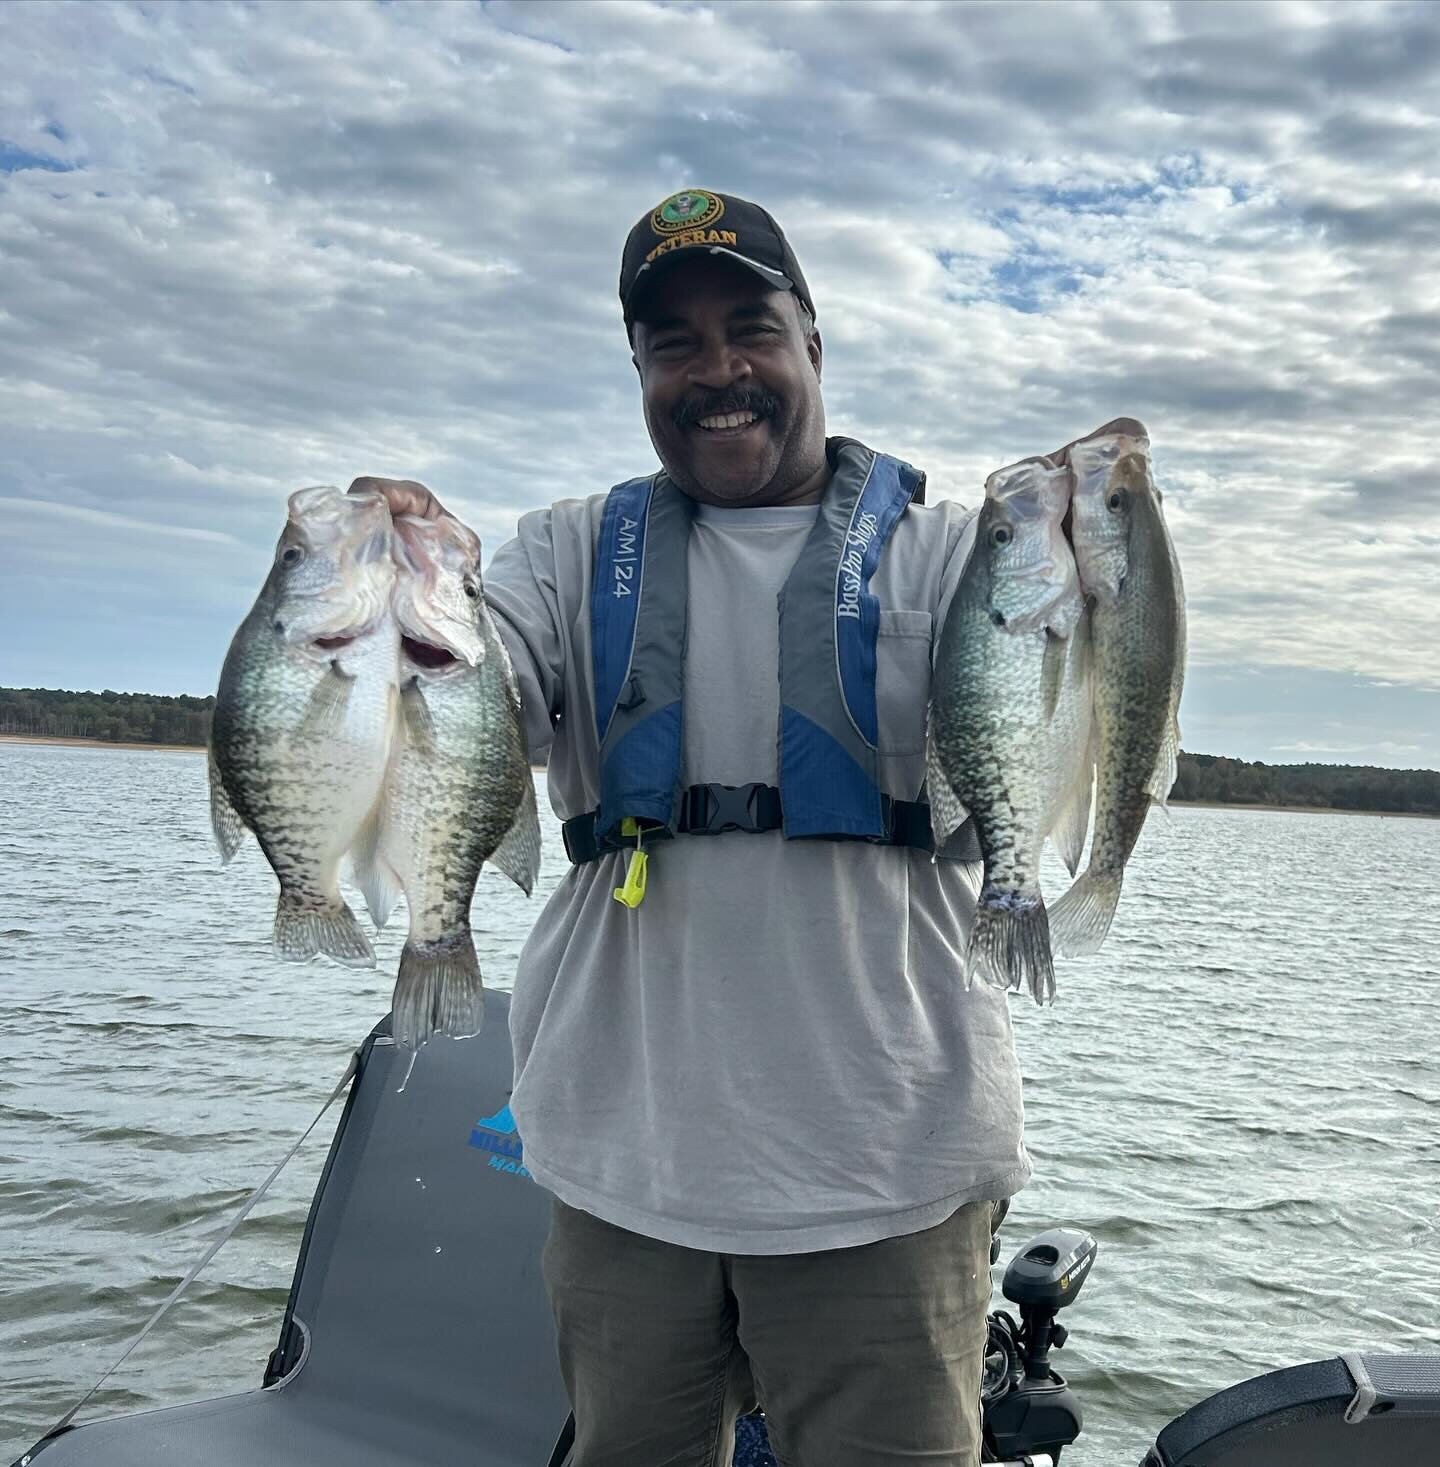 Mr. Carter from Illinois with some nice ones he caught scoping fall crappie on Enid Lake with Capt. Shayne. Looking forward to hosting his crew for a couple of days! #bartonoutfitters #littleqranch #enidlakecharters #franklinfishingtours #weareoutdoo